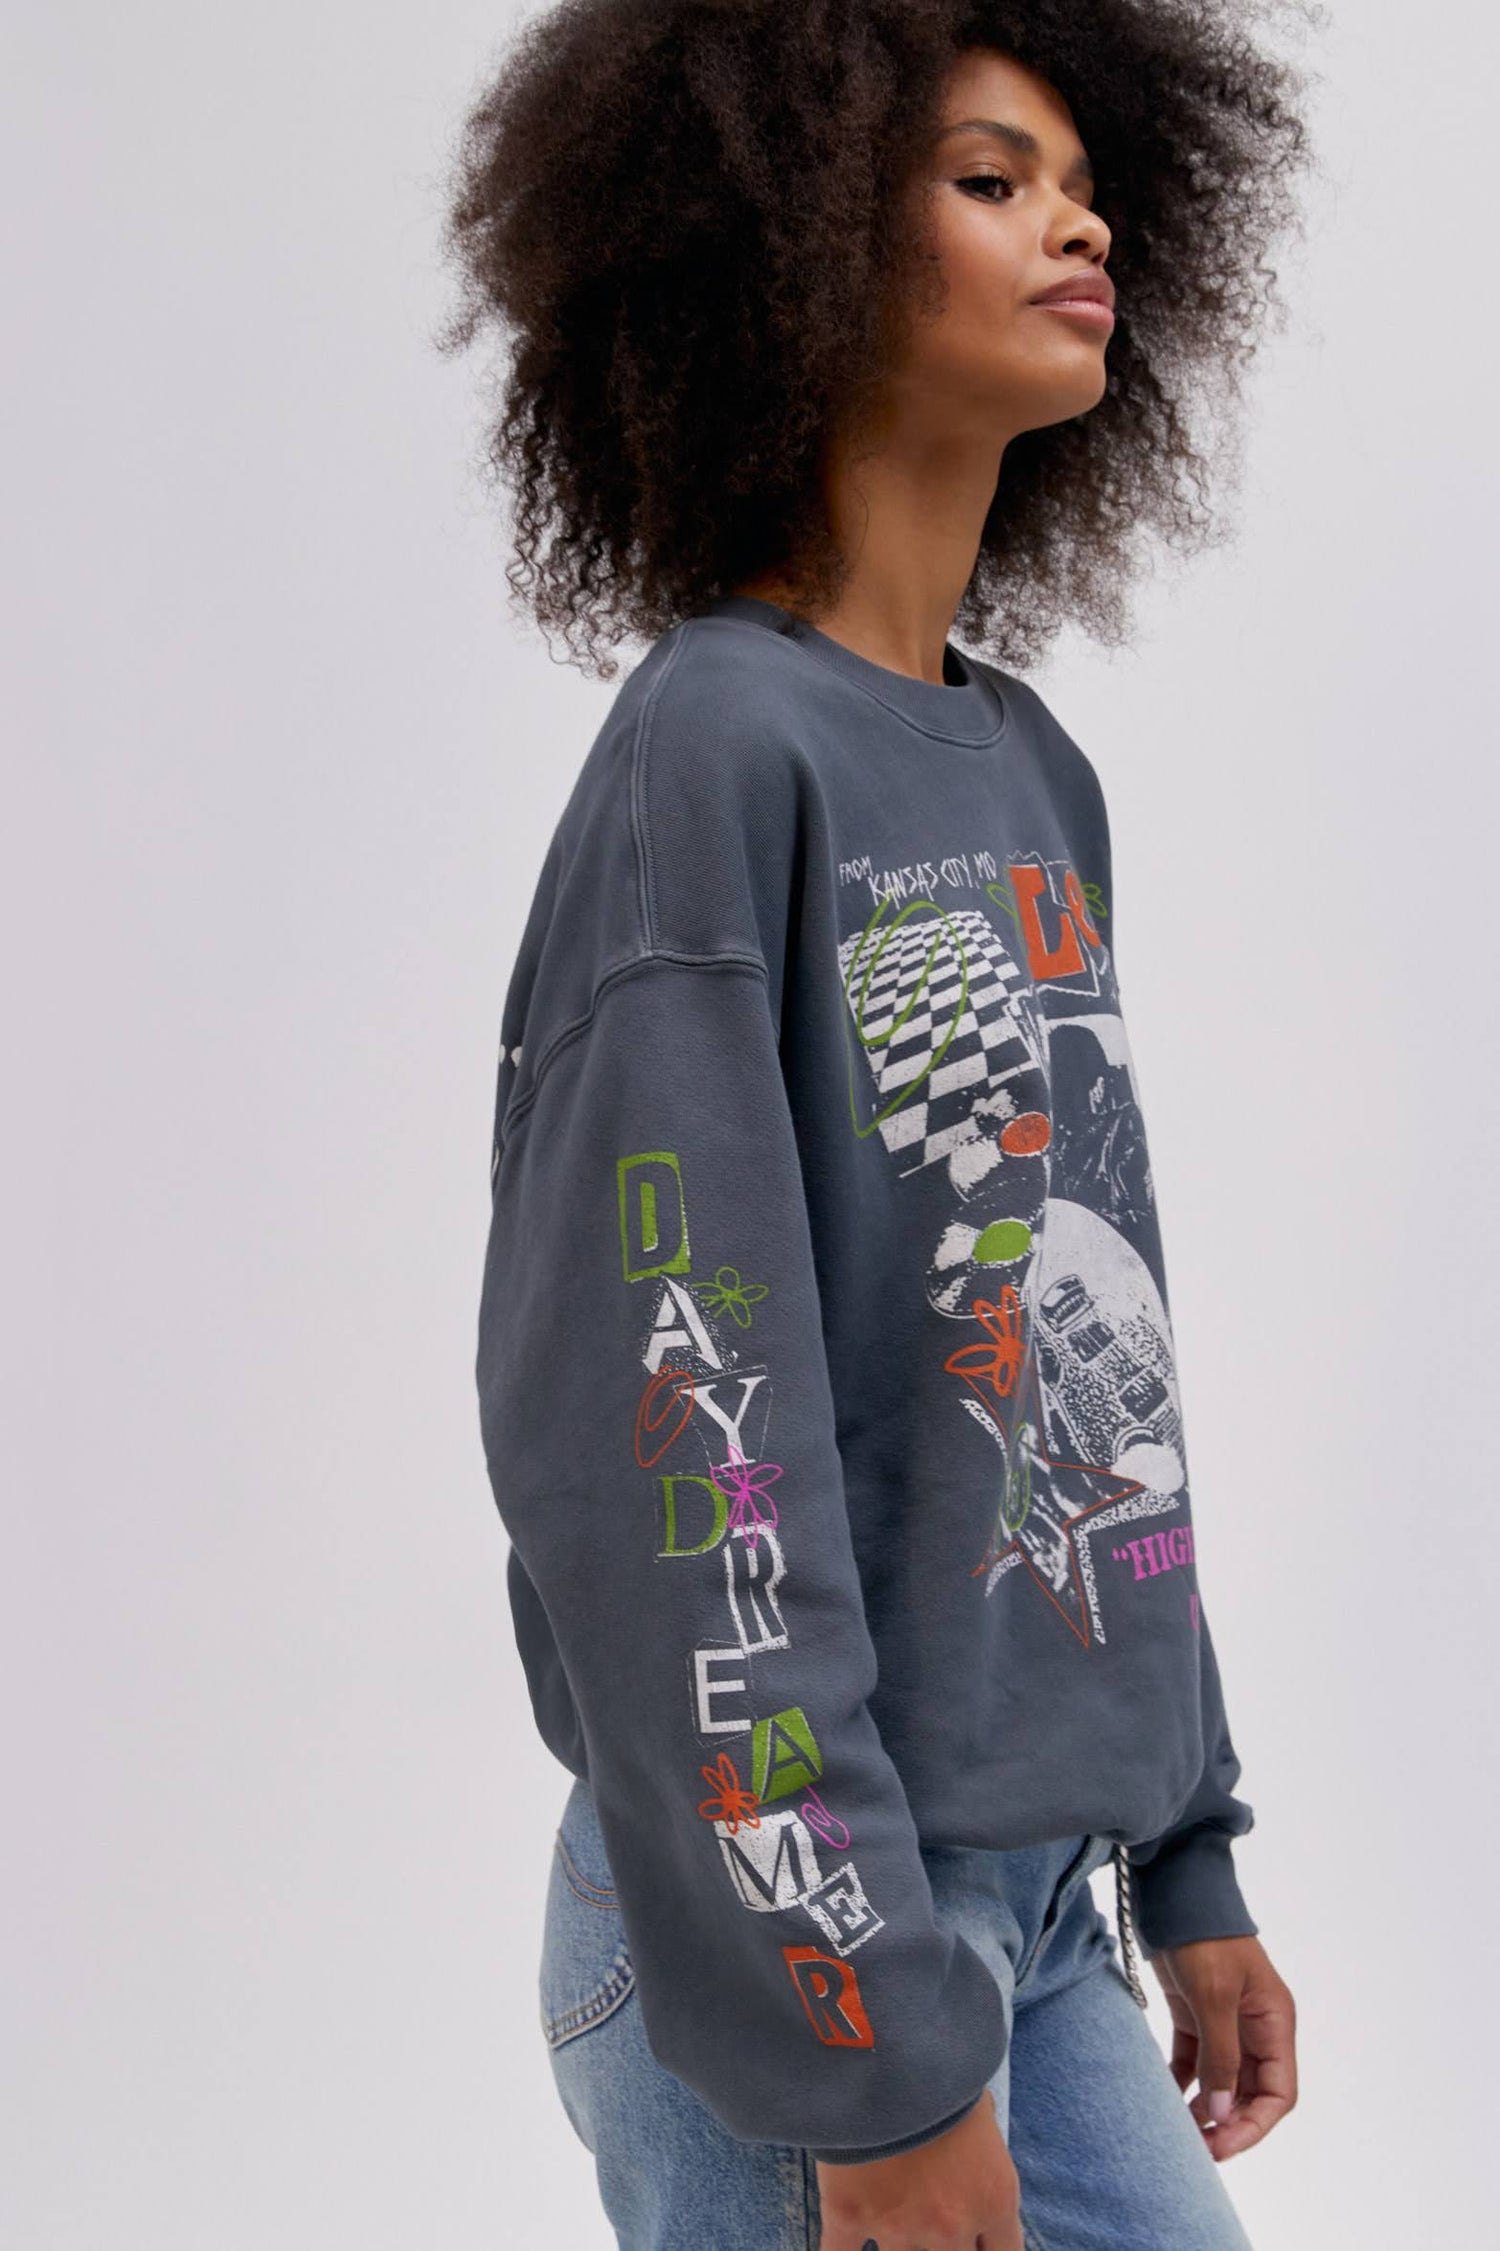 Side profile of curly haired model wearing a Lee x Daydreamer collab graphic sweatshirt in washed black.